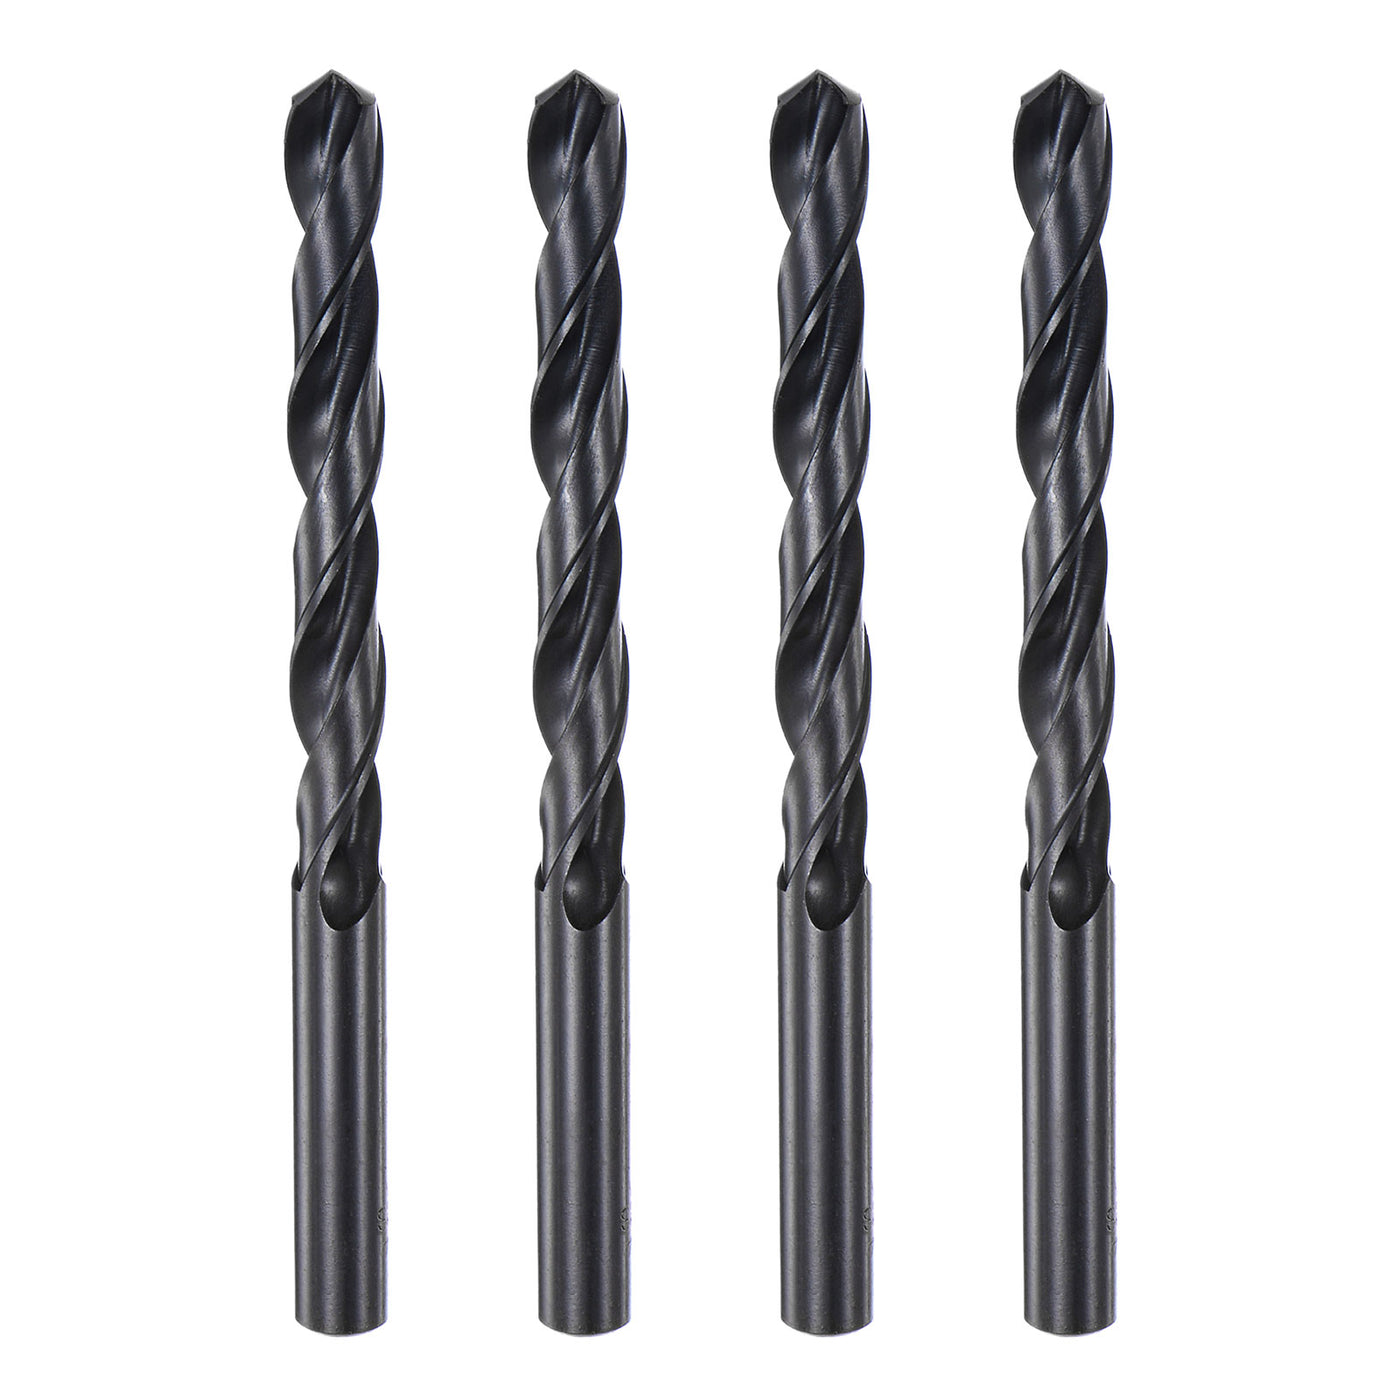 uxcell Uxcell High Speed Steel Twist Drill Bit, 9.4mm Fully Ground Black Oxide 125mm Long 4Pcs